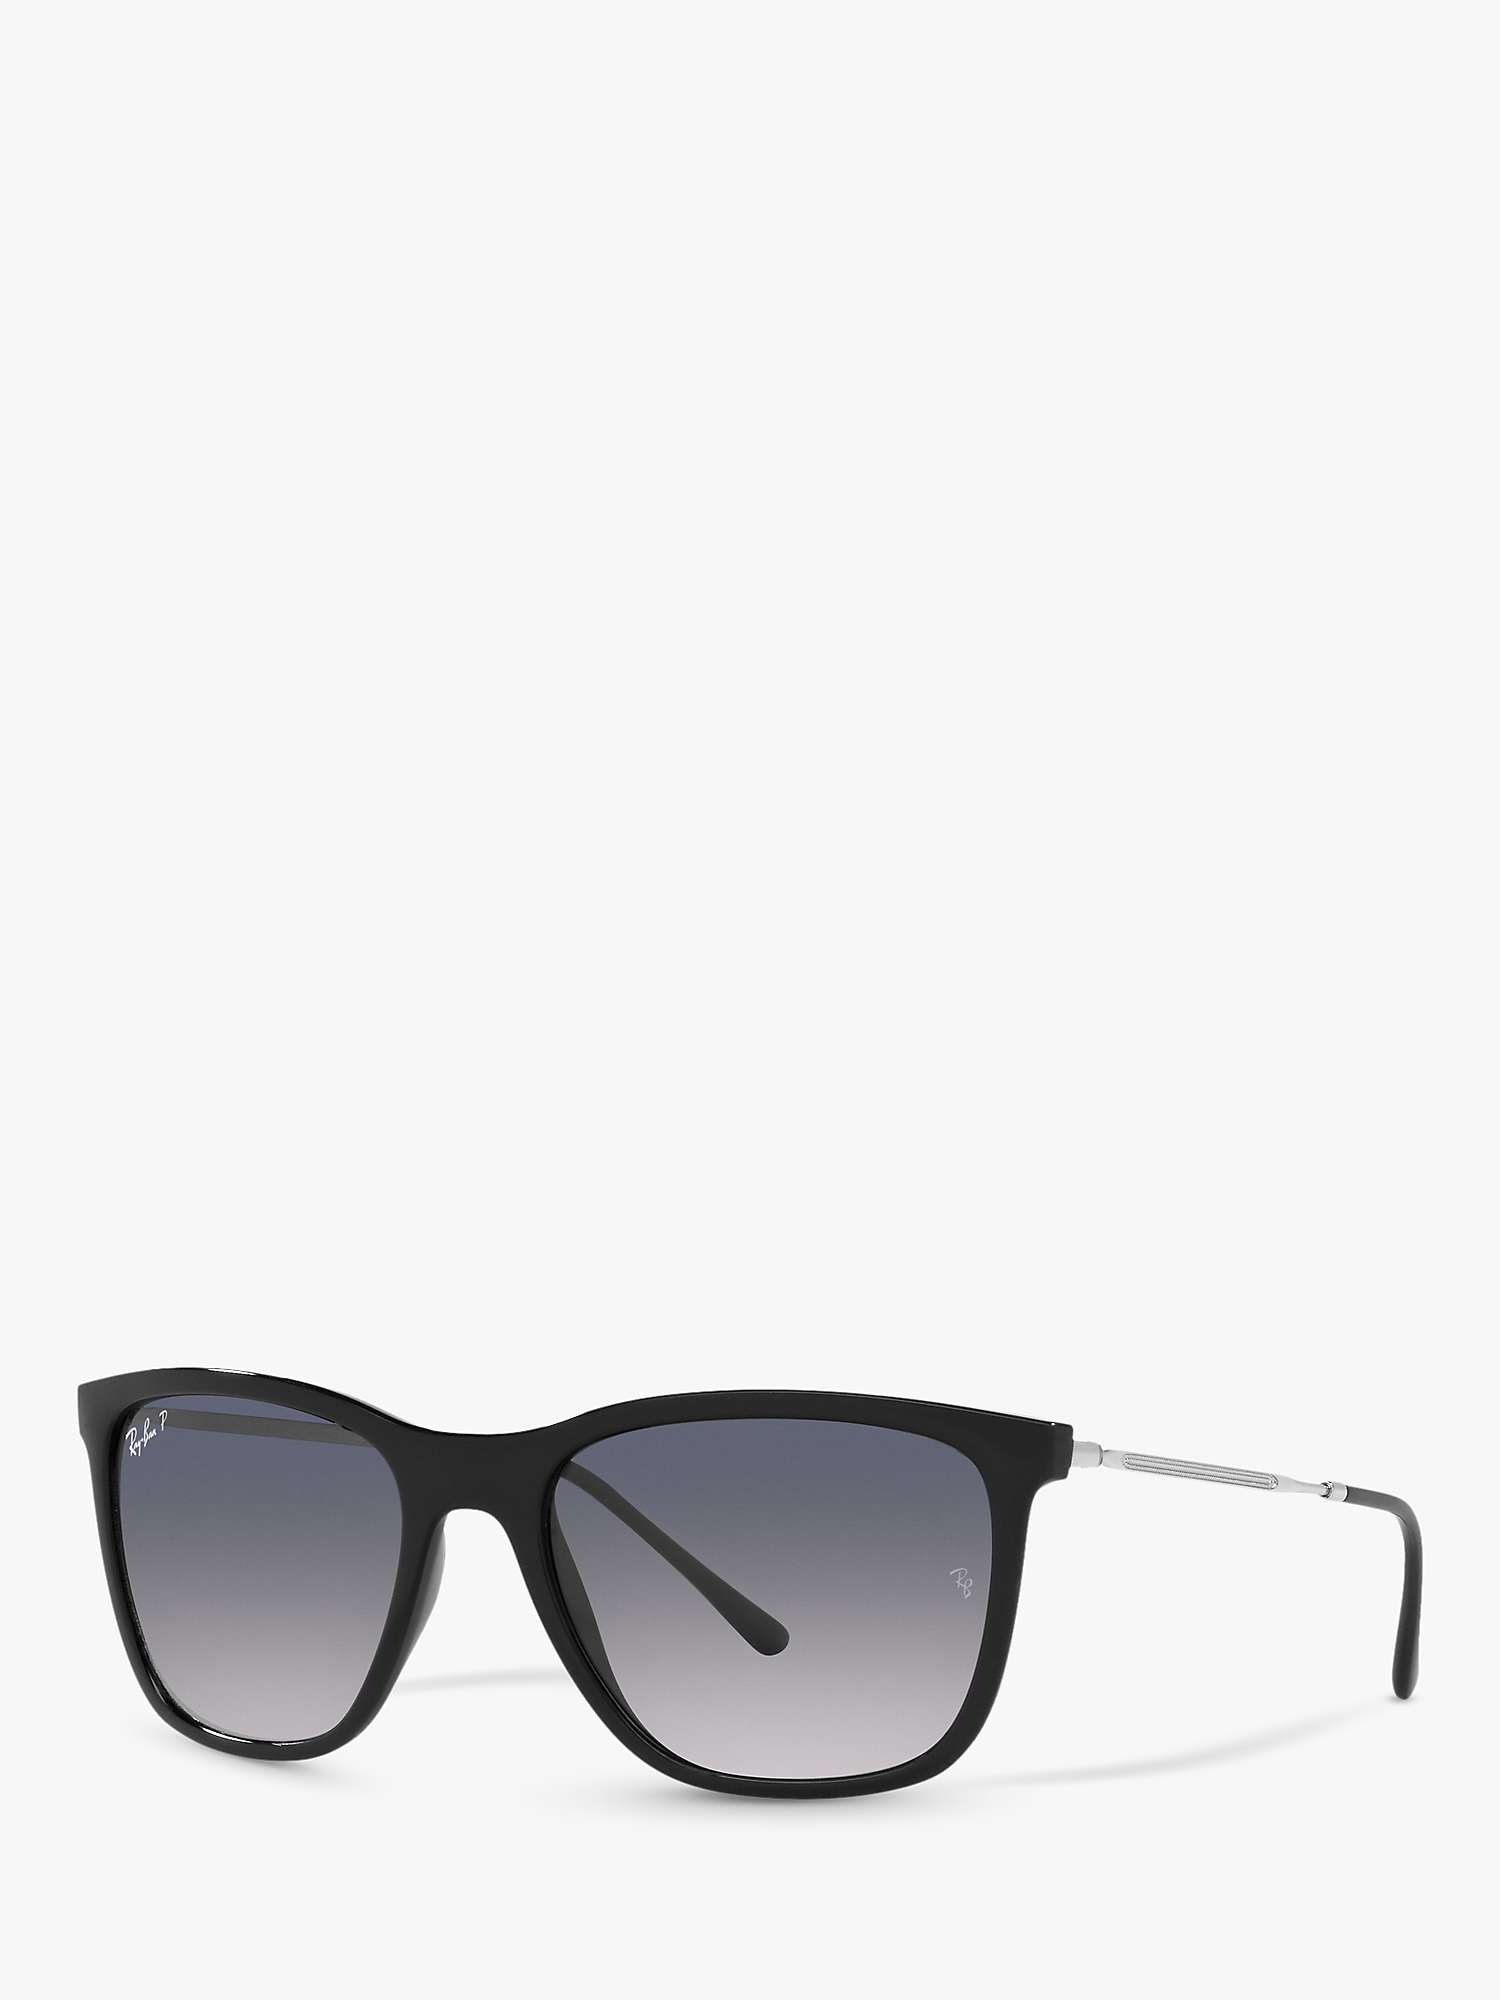 Buy Ray-Ban RB4344 Unisex Polarised Pillow Square Frame Sunglasses, Black/Silver/Grey Gradient Online at johnlewis.com